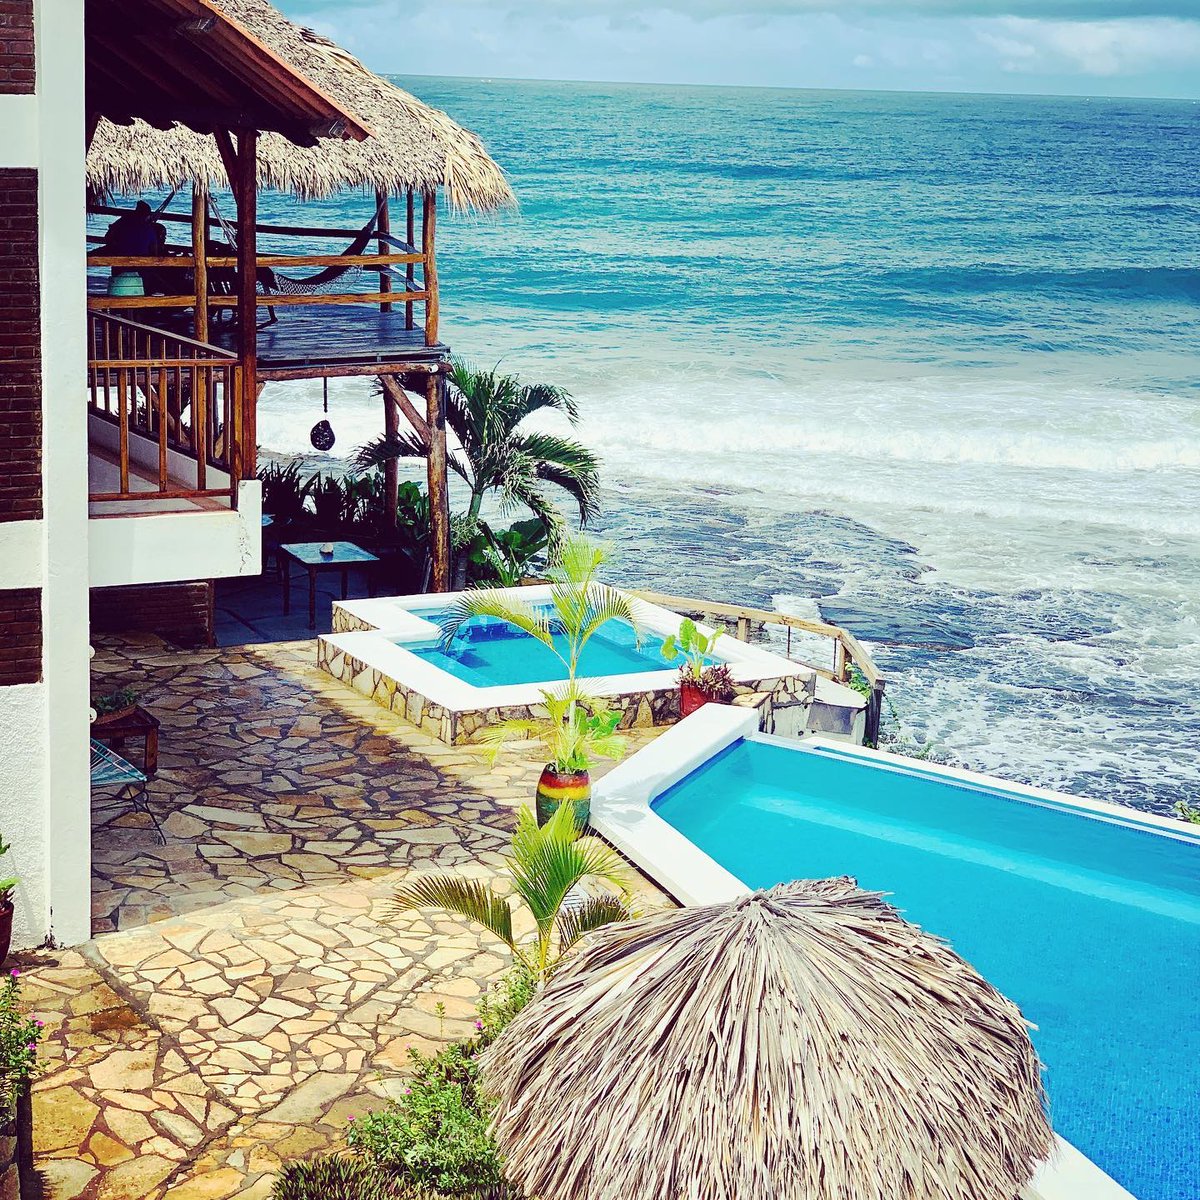 What are you waiting for? This view is calling your name! Email us for inquiries!!! #surftrip #learntosurf #surfcamps #nicaragua #bossisback #traveltonicaragua #discovernicaragua #roamsurf #spearfishing #thenewnormal